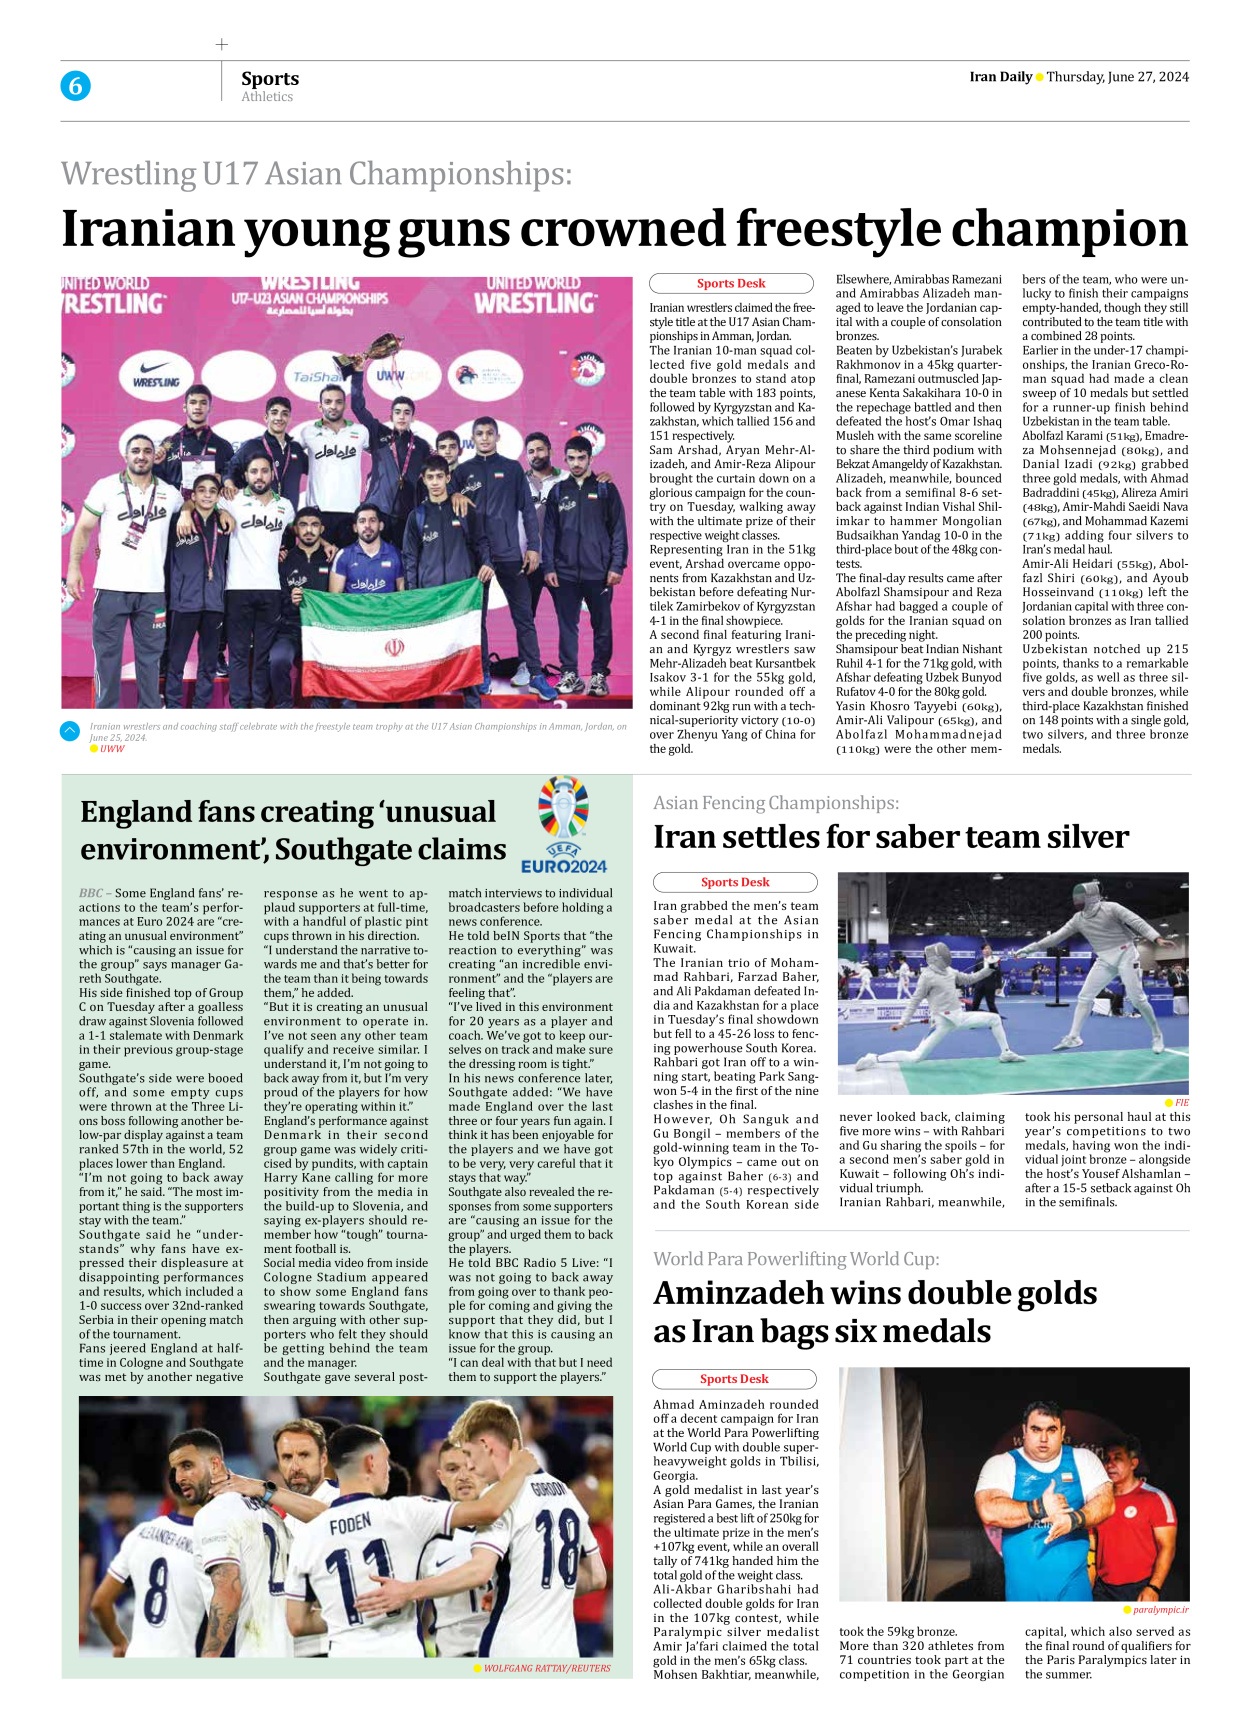 Iran Daily - Number Seven Thousand Five Hundred and Ninety - 27 June 2024 - Page 6